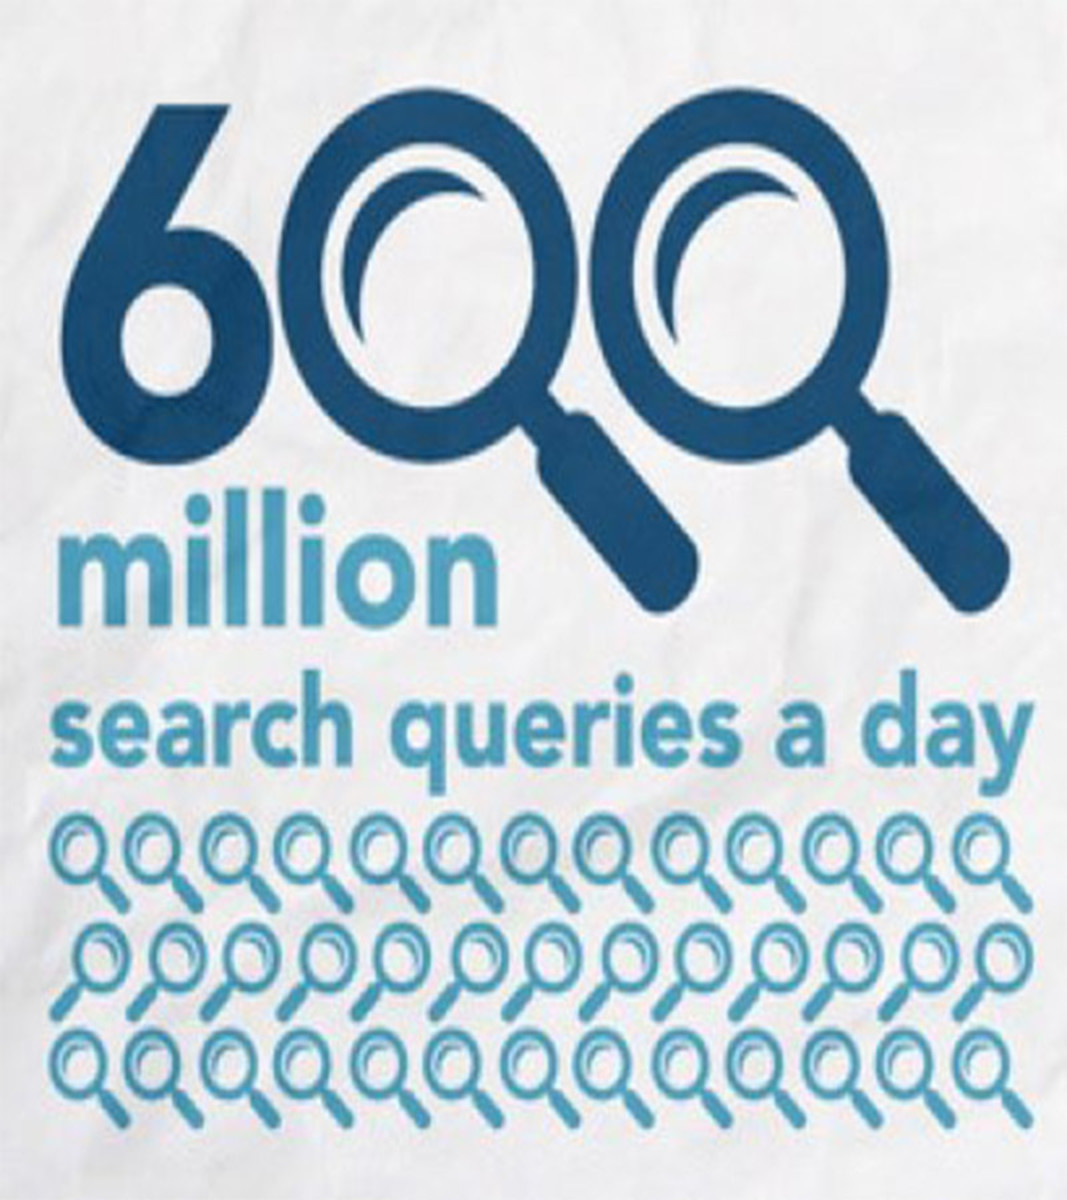 Twitter handles 600 million search queries per day, though lots are automated